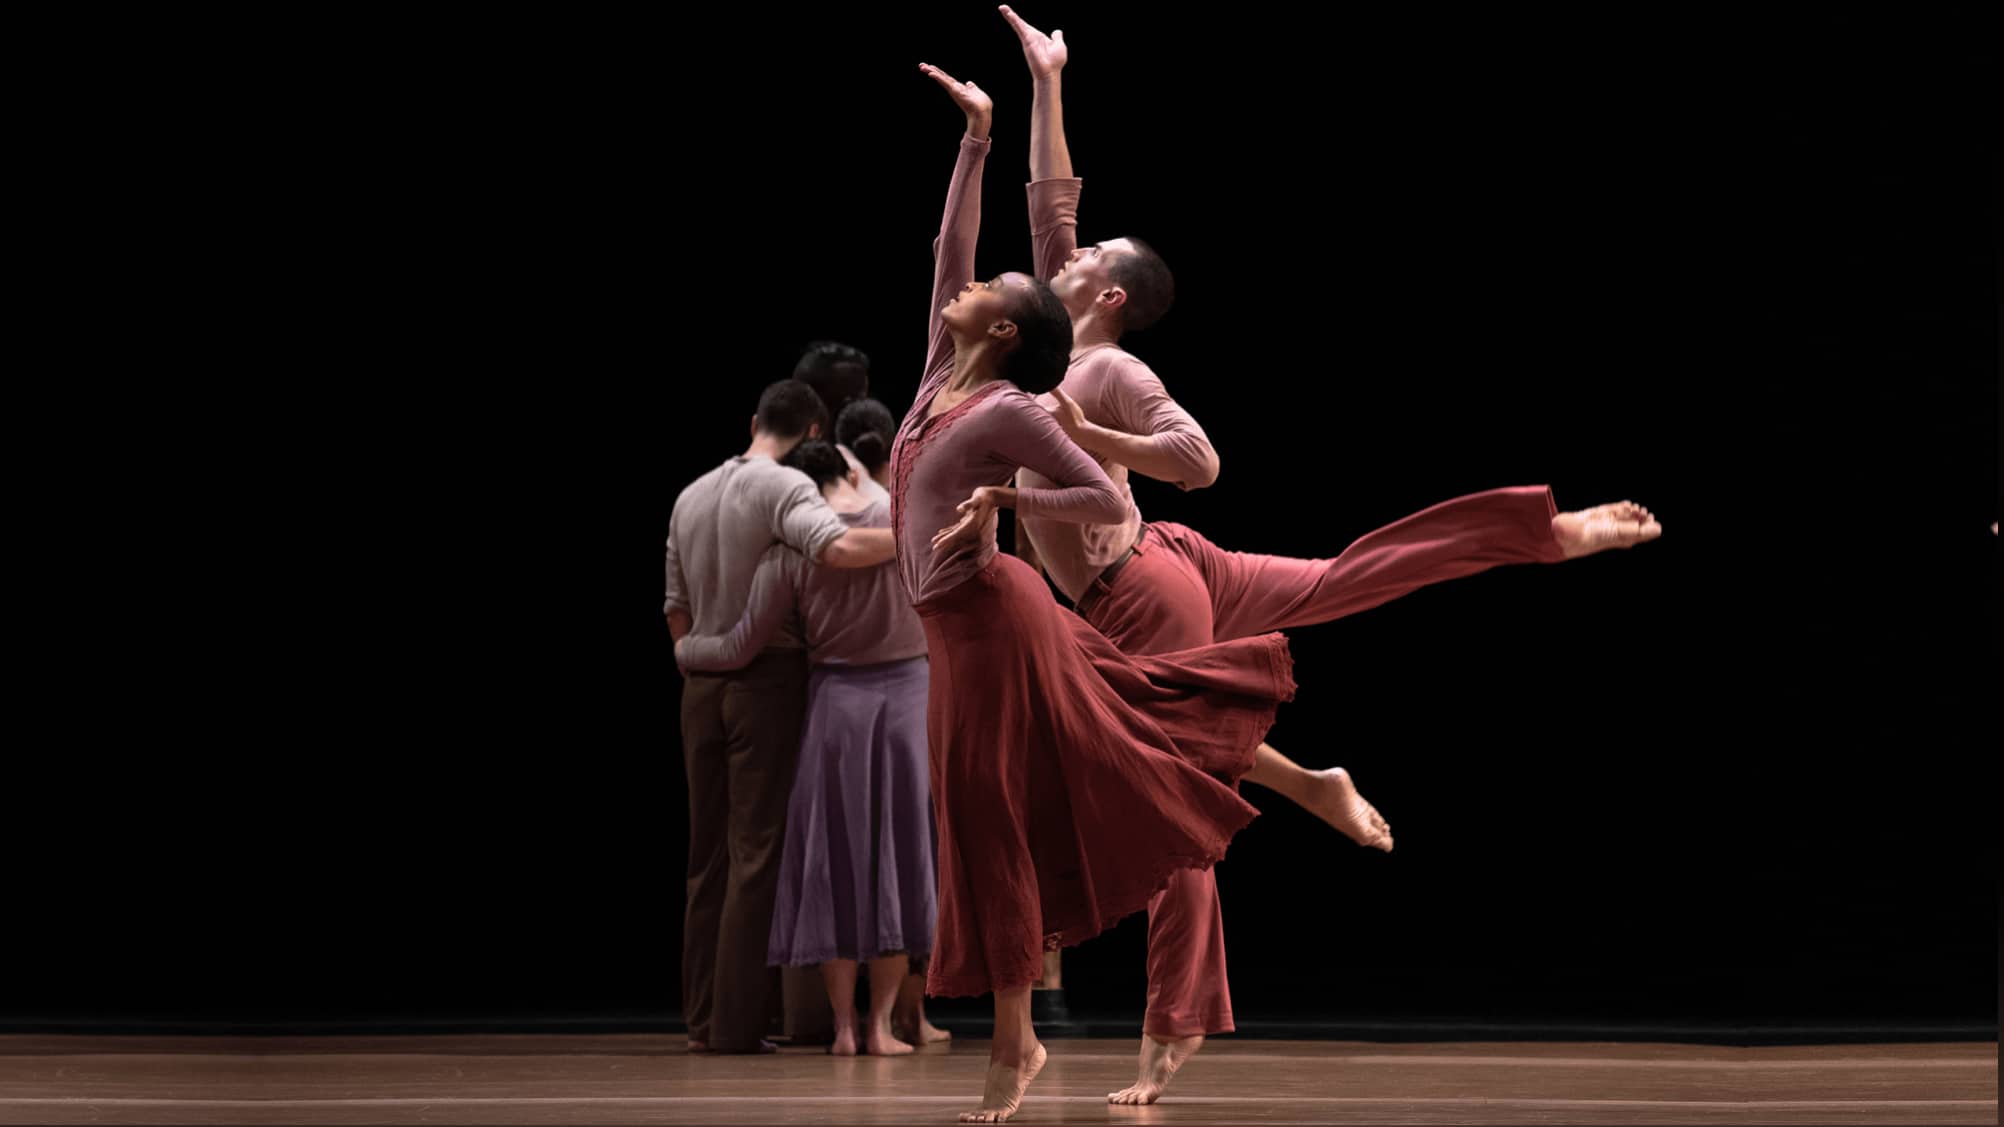 Over the last four decades, Jacob’s Pillow has been an artistic home for Hubbard Street Dance Chicago, and this summer they will perform recent work. Press photo courtesy of Jacob's Pillow